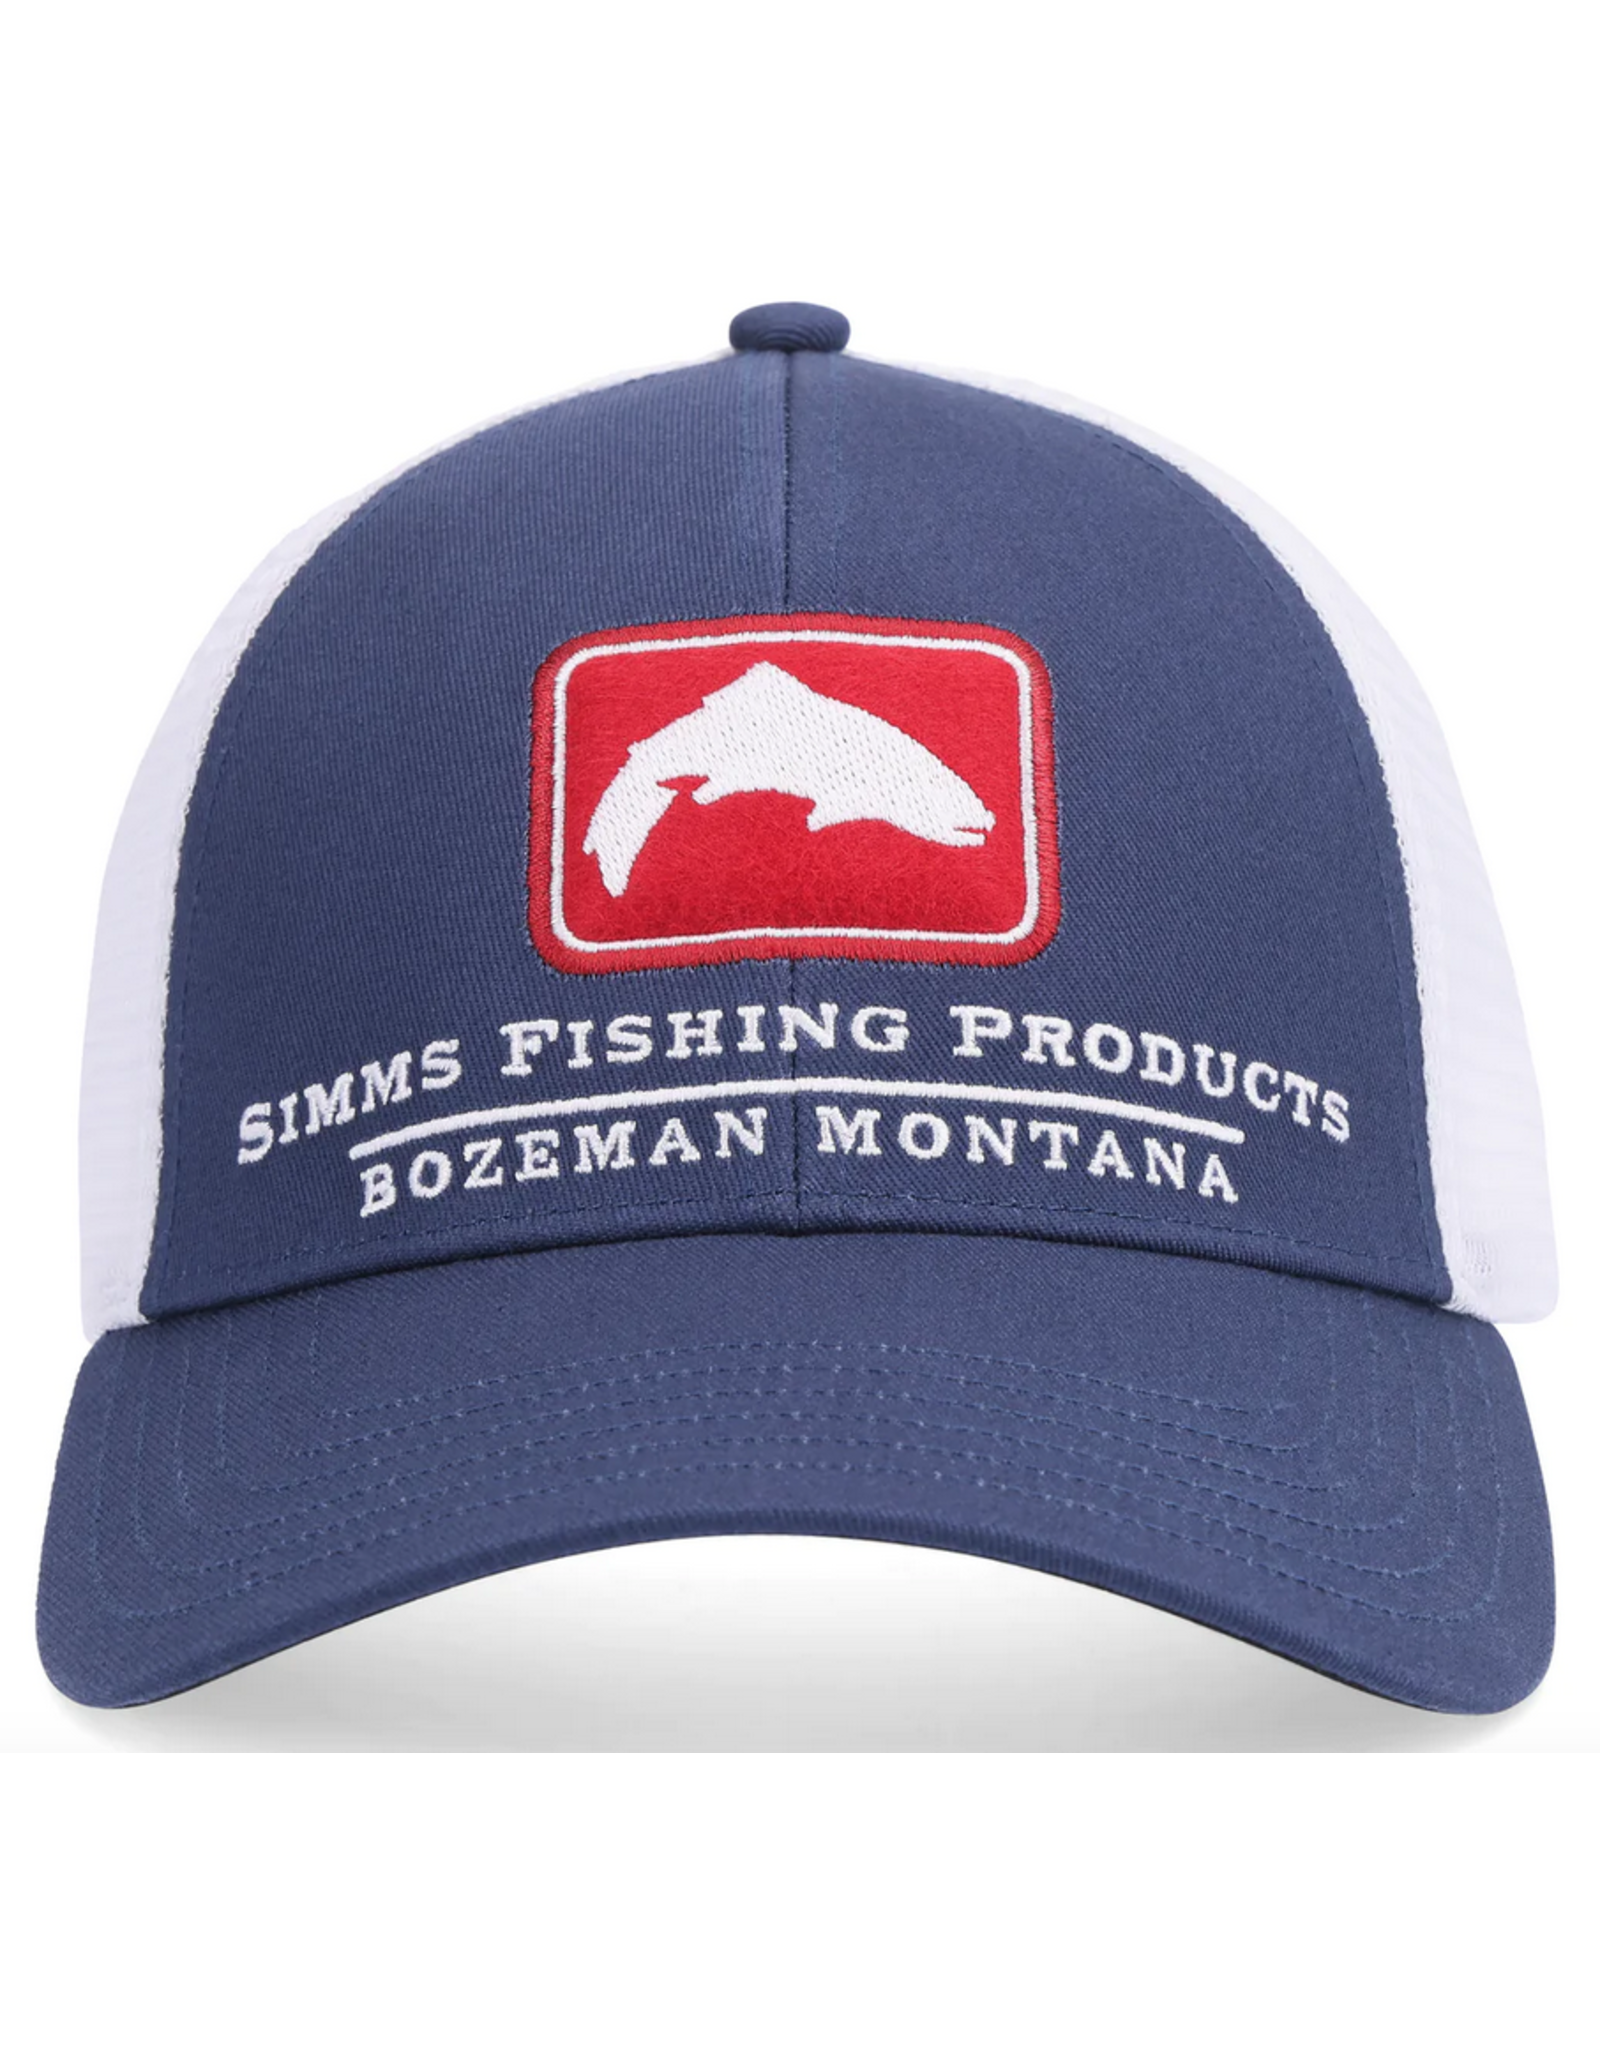 Simms Fishing hat New for Sale in Manteo, NC - OfferUp